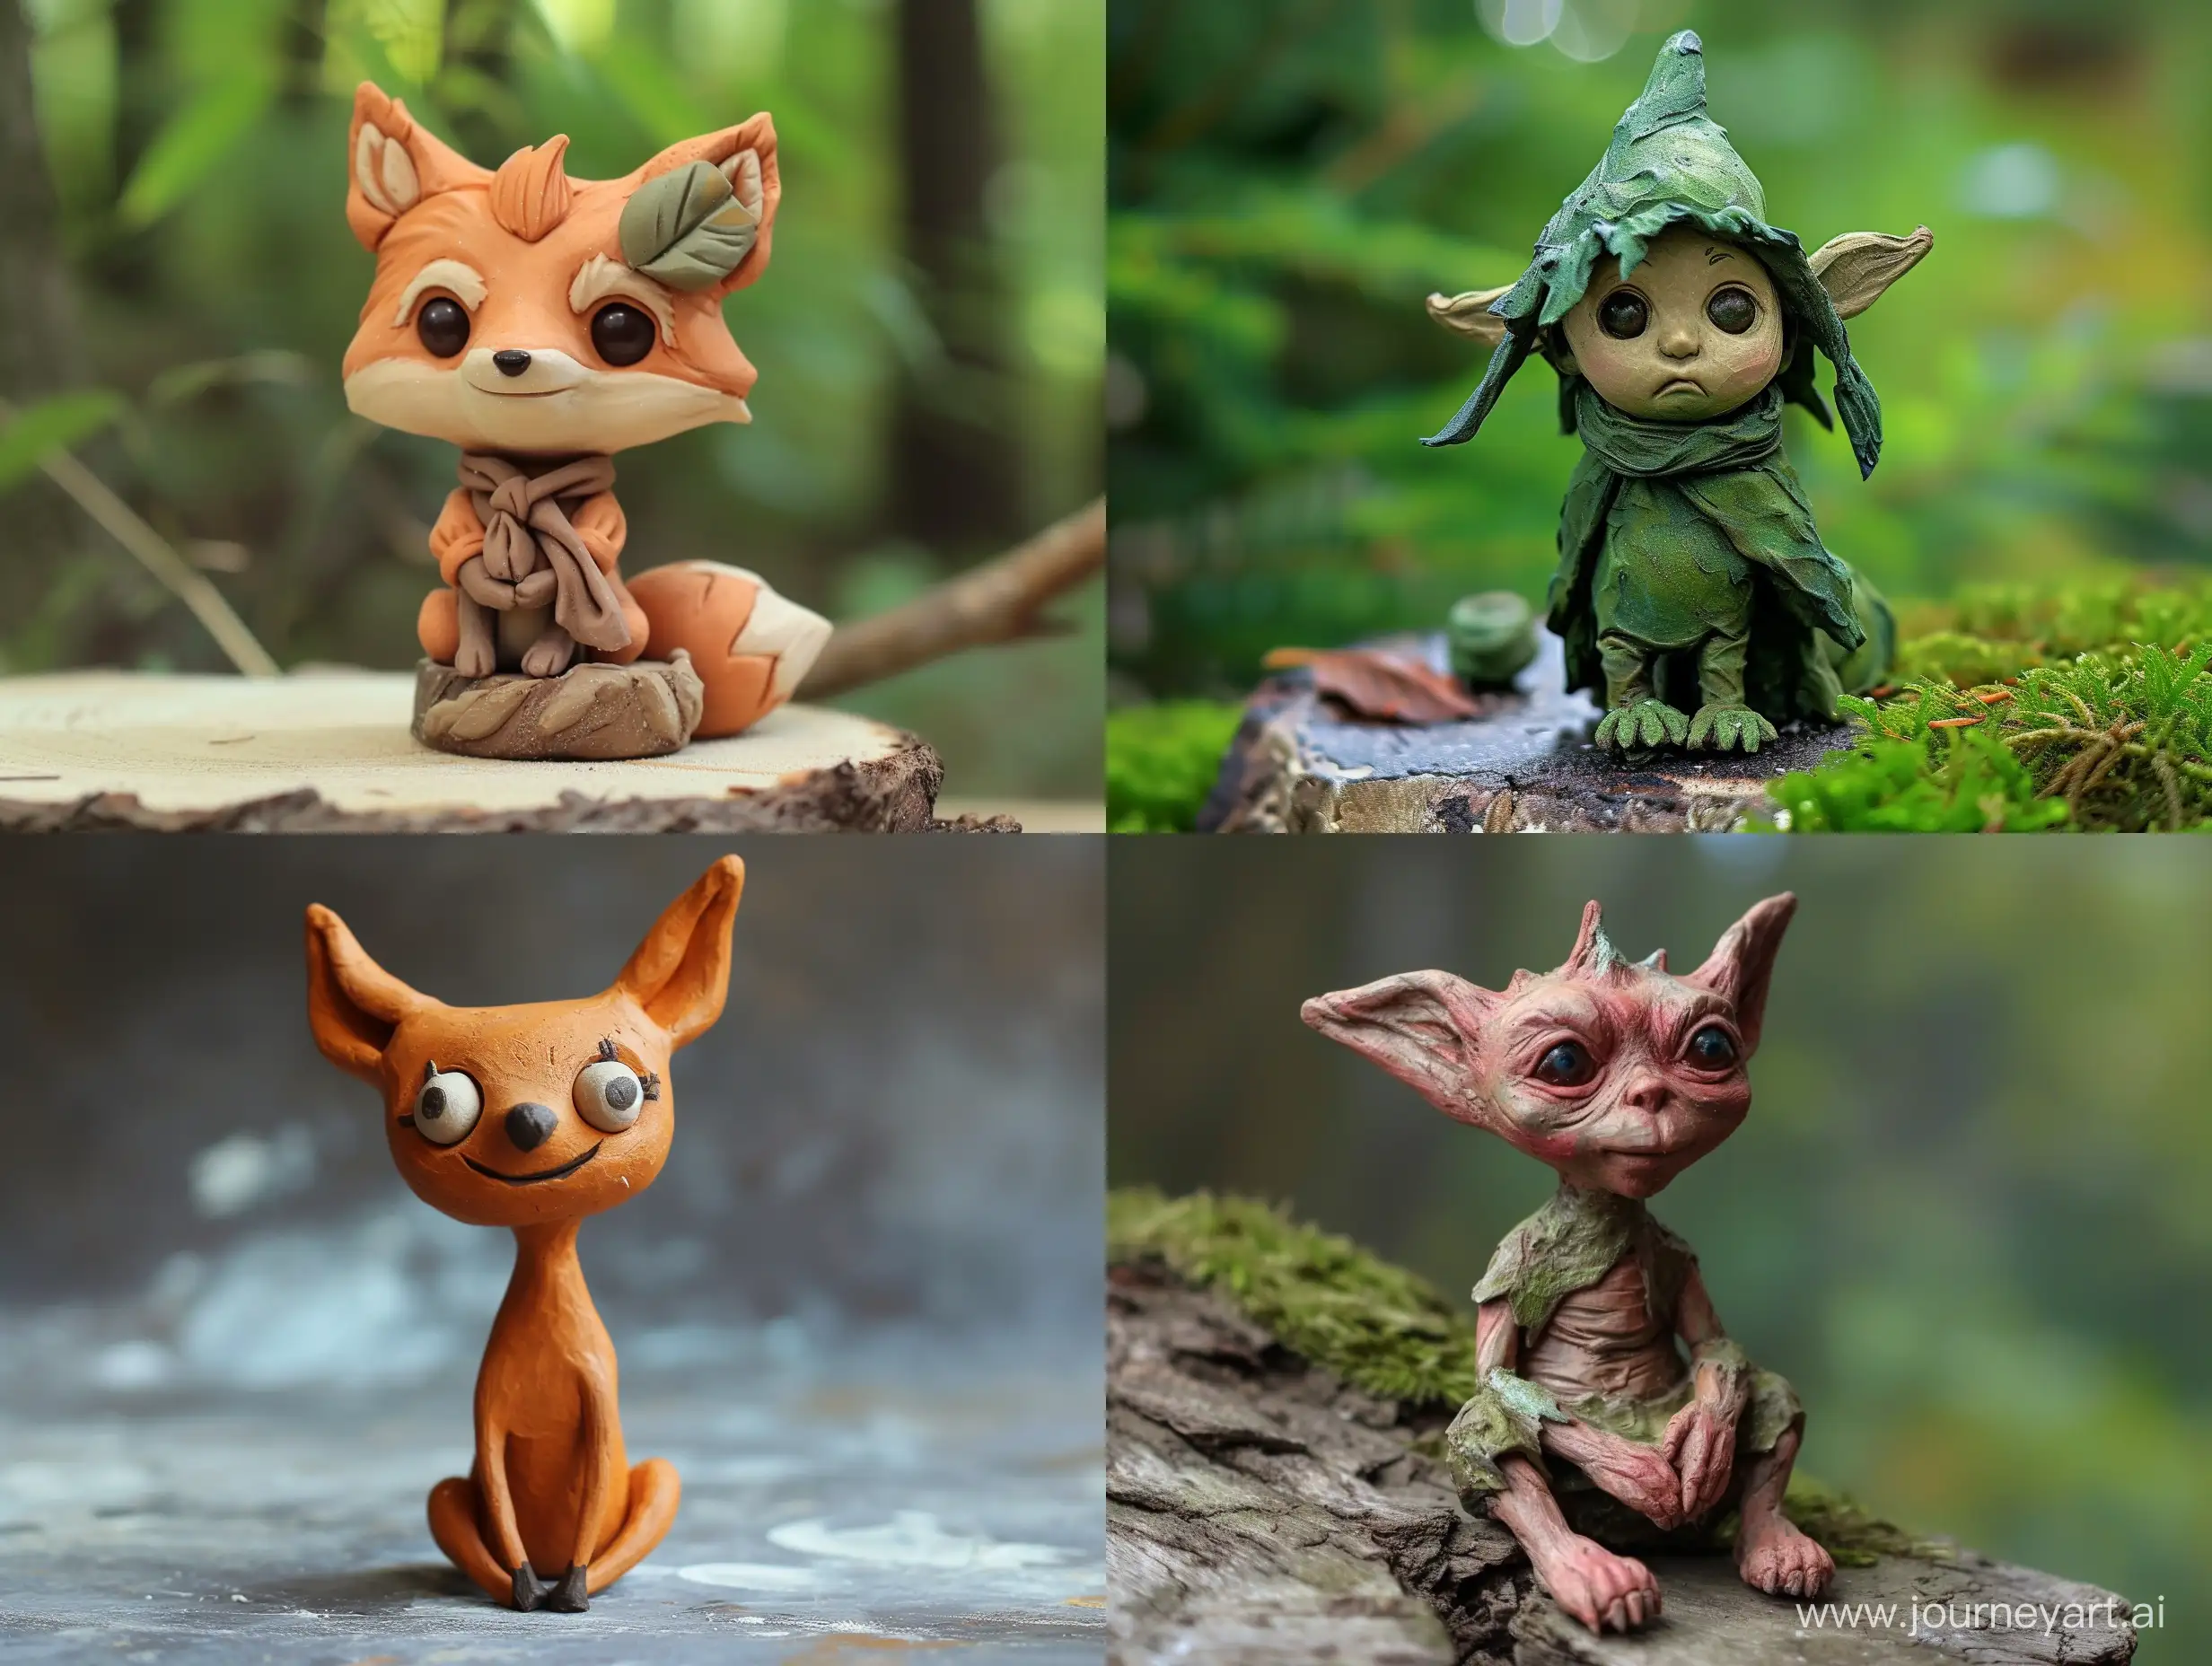 Enchanting-Clay-Statuette-of-a-Cute-FairyTale-Character